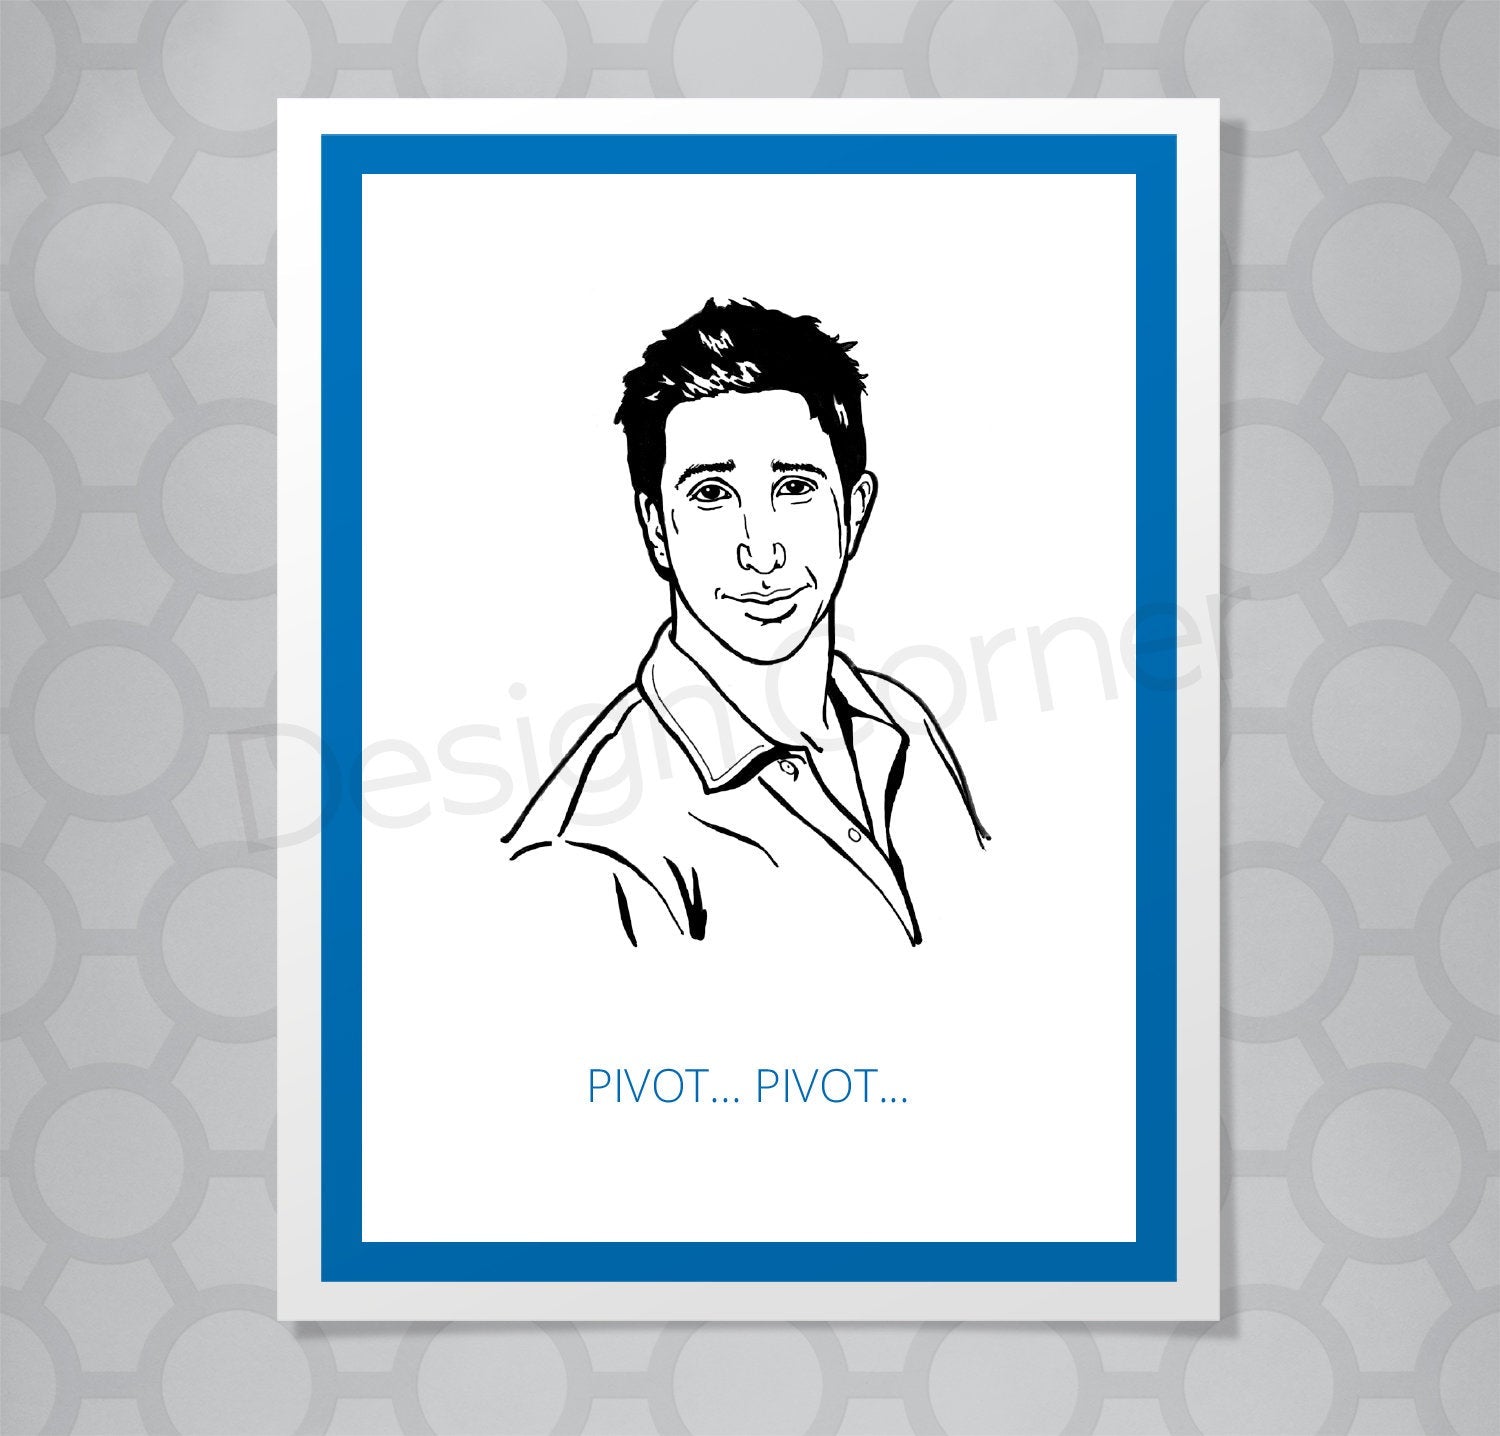 Greeting card with illustration of Friends Ross. Caption says "Pivot... Pivot..."